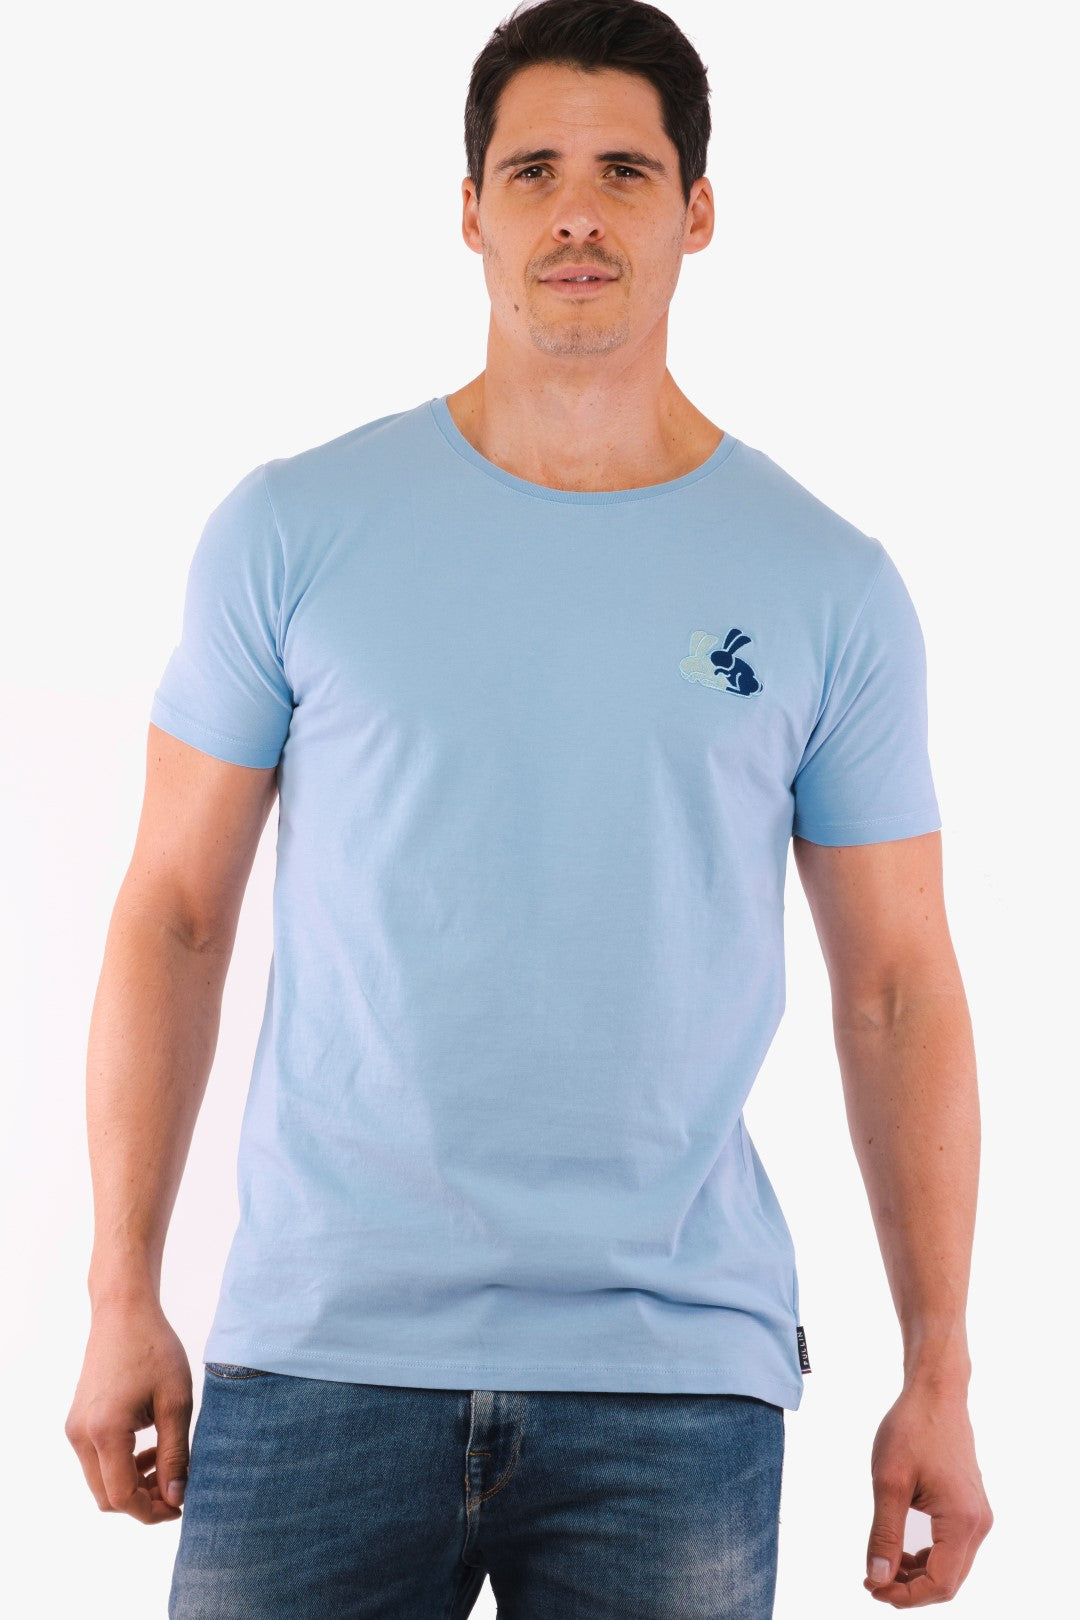 Pullin T-Shirt in Blue color